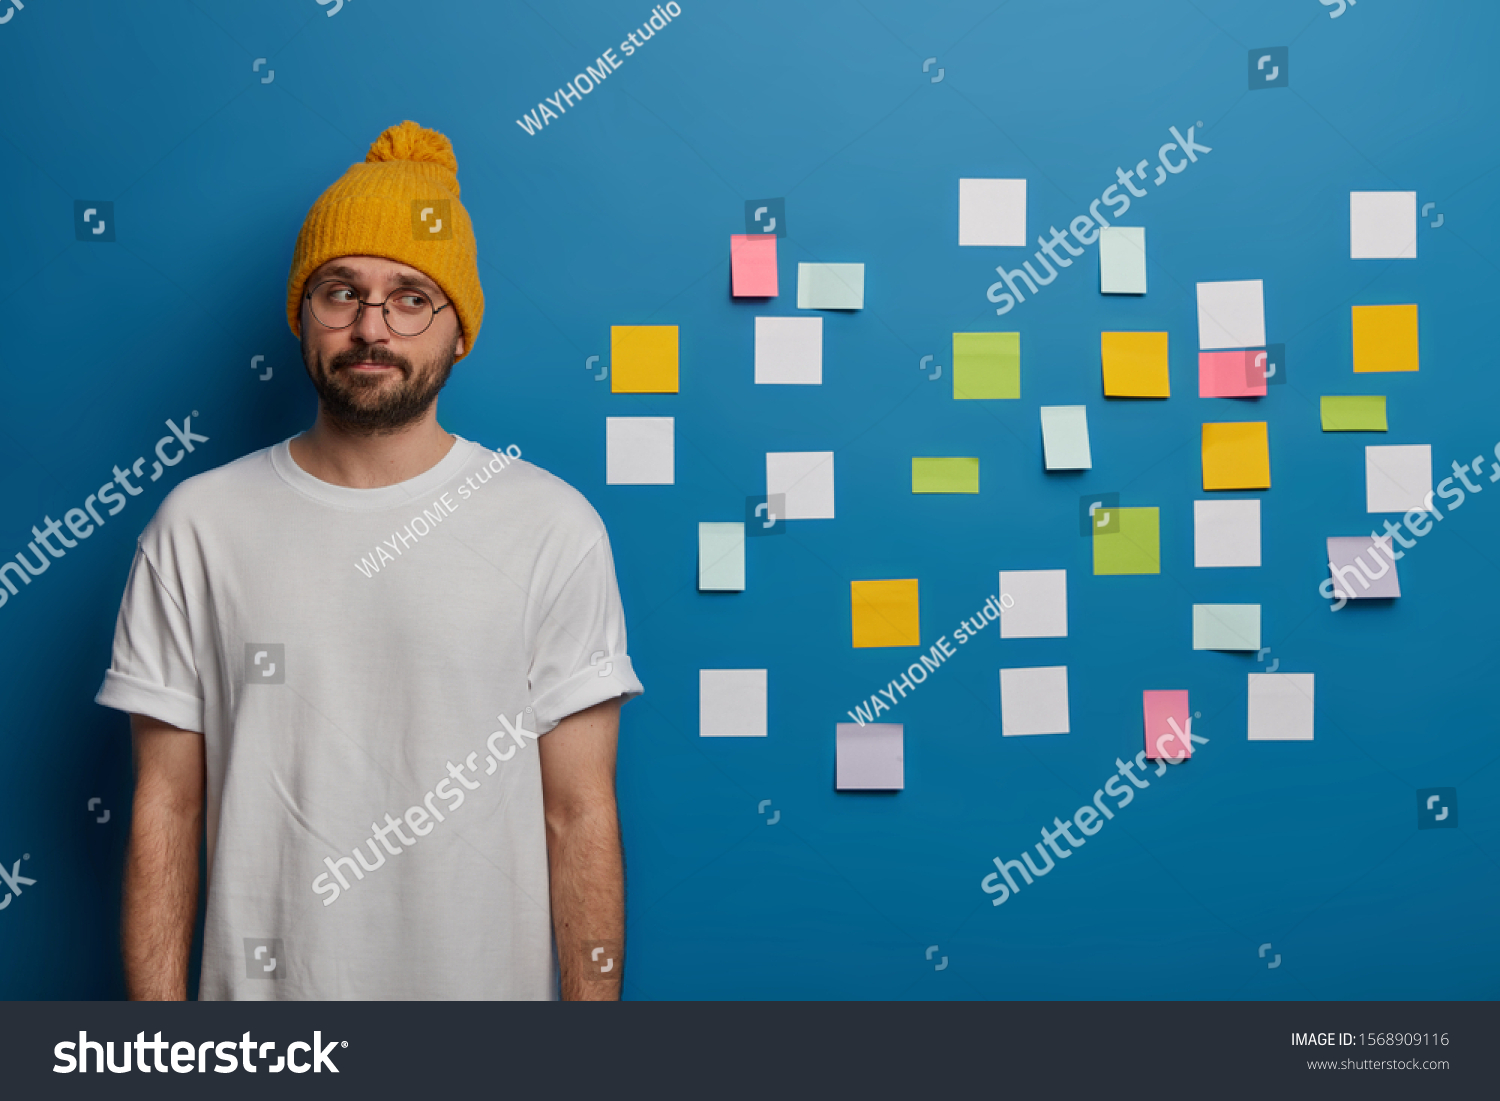 Indoor shot of serious contemplative man with beard, dressed casually, thinks about writing diploma, uses adhesive notes to write down information to remember. Male manager plans working day #1568909116